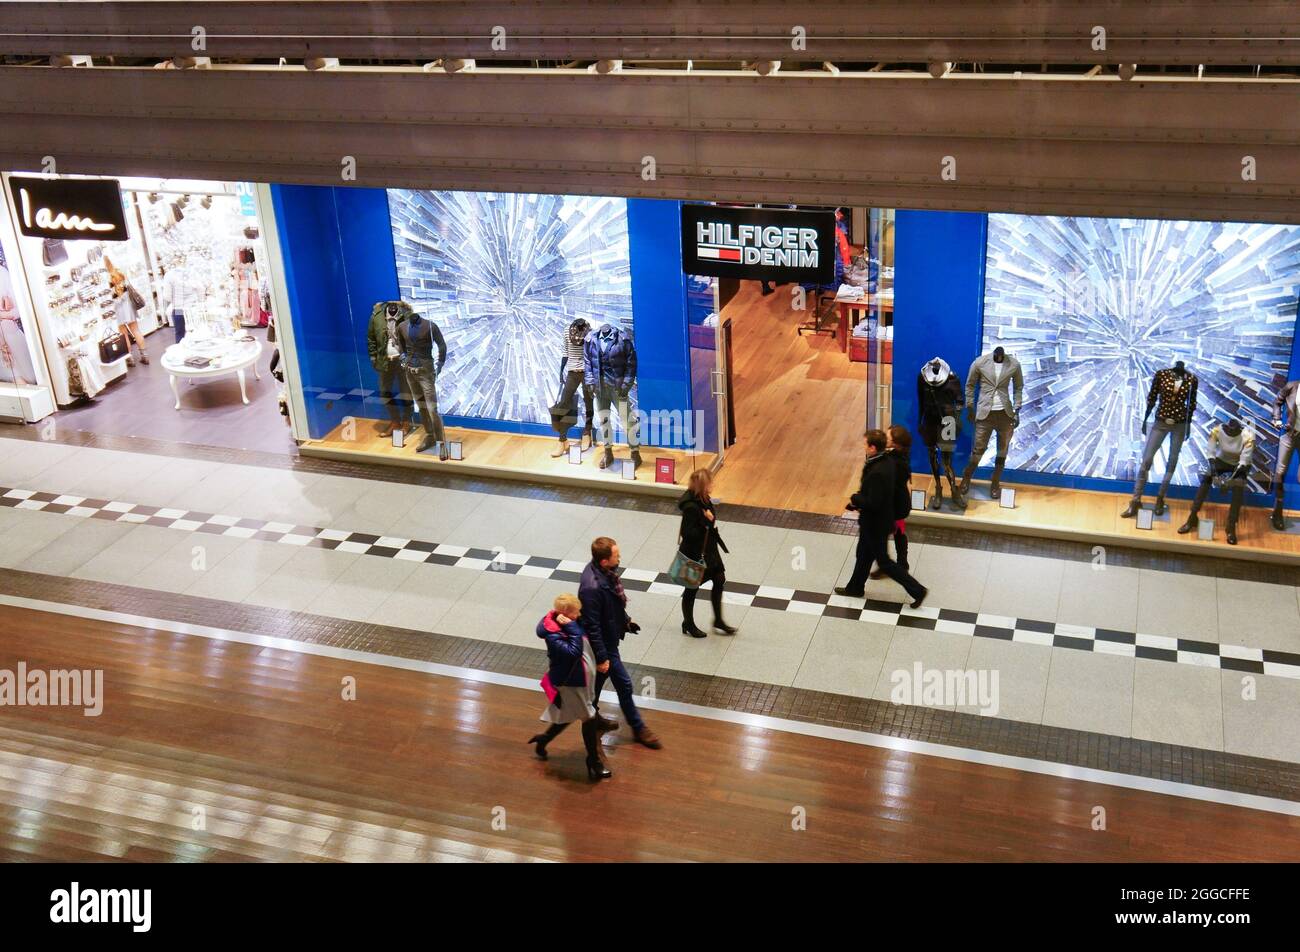 POZNAN, POLAND - Dec 14, 2014: The people passing a Hilfiger clothing store in the Stary Browar shopping mall, Poznan, Poland Stock Photo